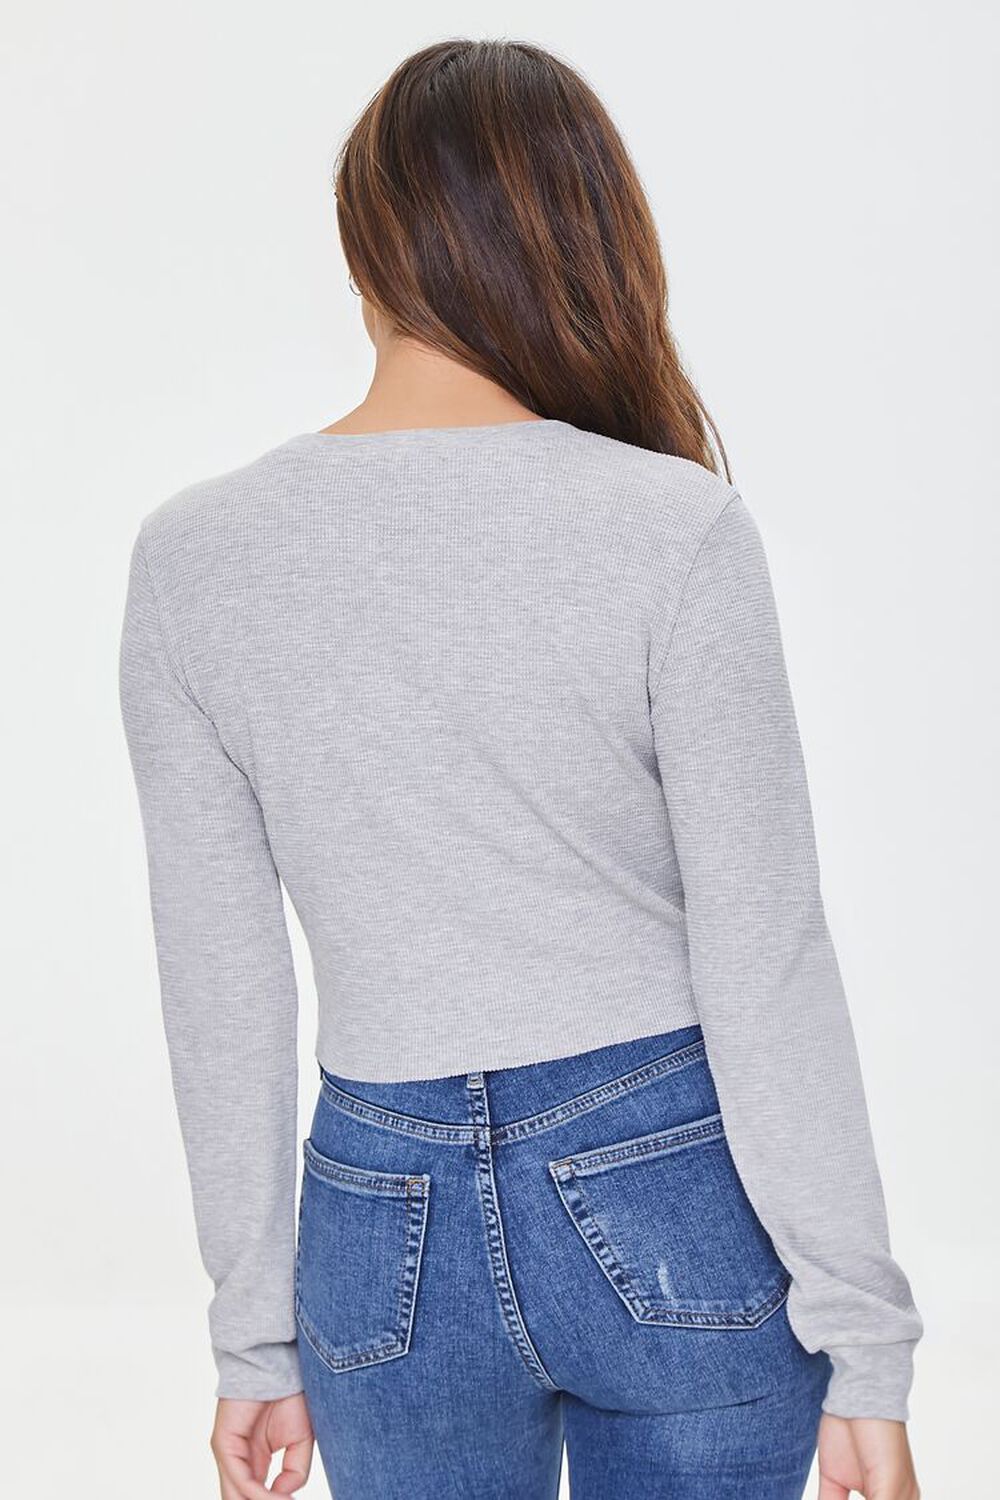 HEATHER GREY Ribbed Knit Top, image 3